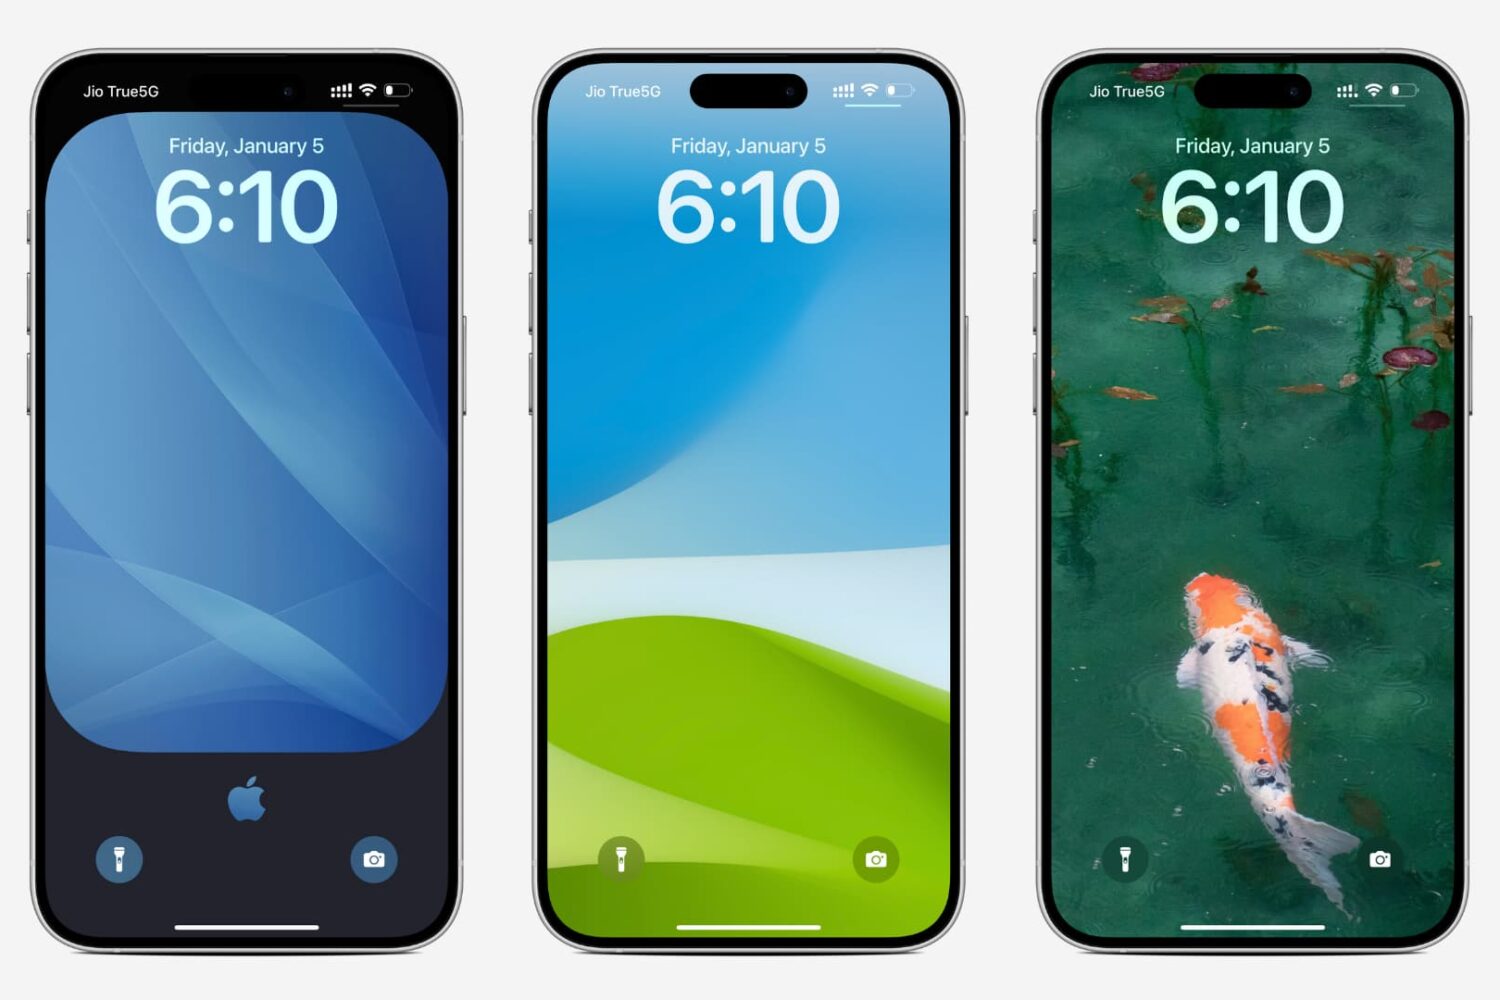 Three iPhone mockups showing different wallpapers on the Lock Screens